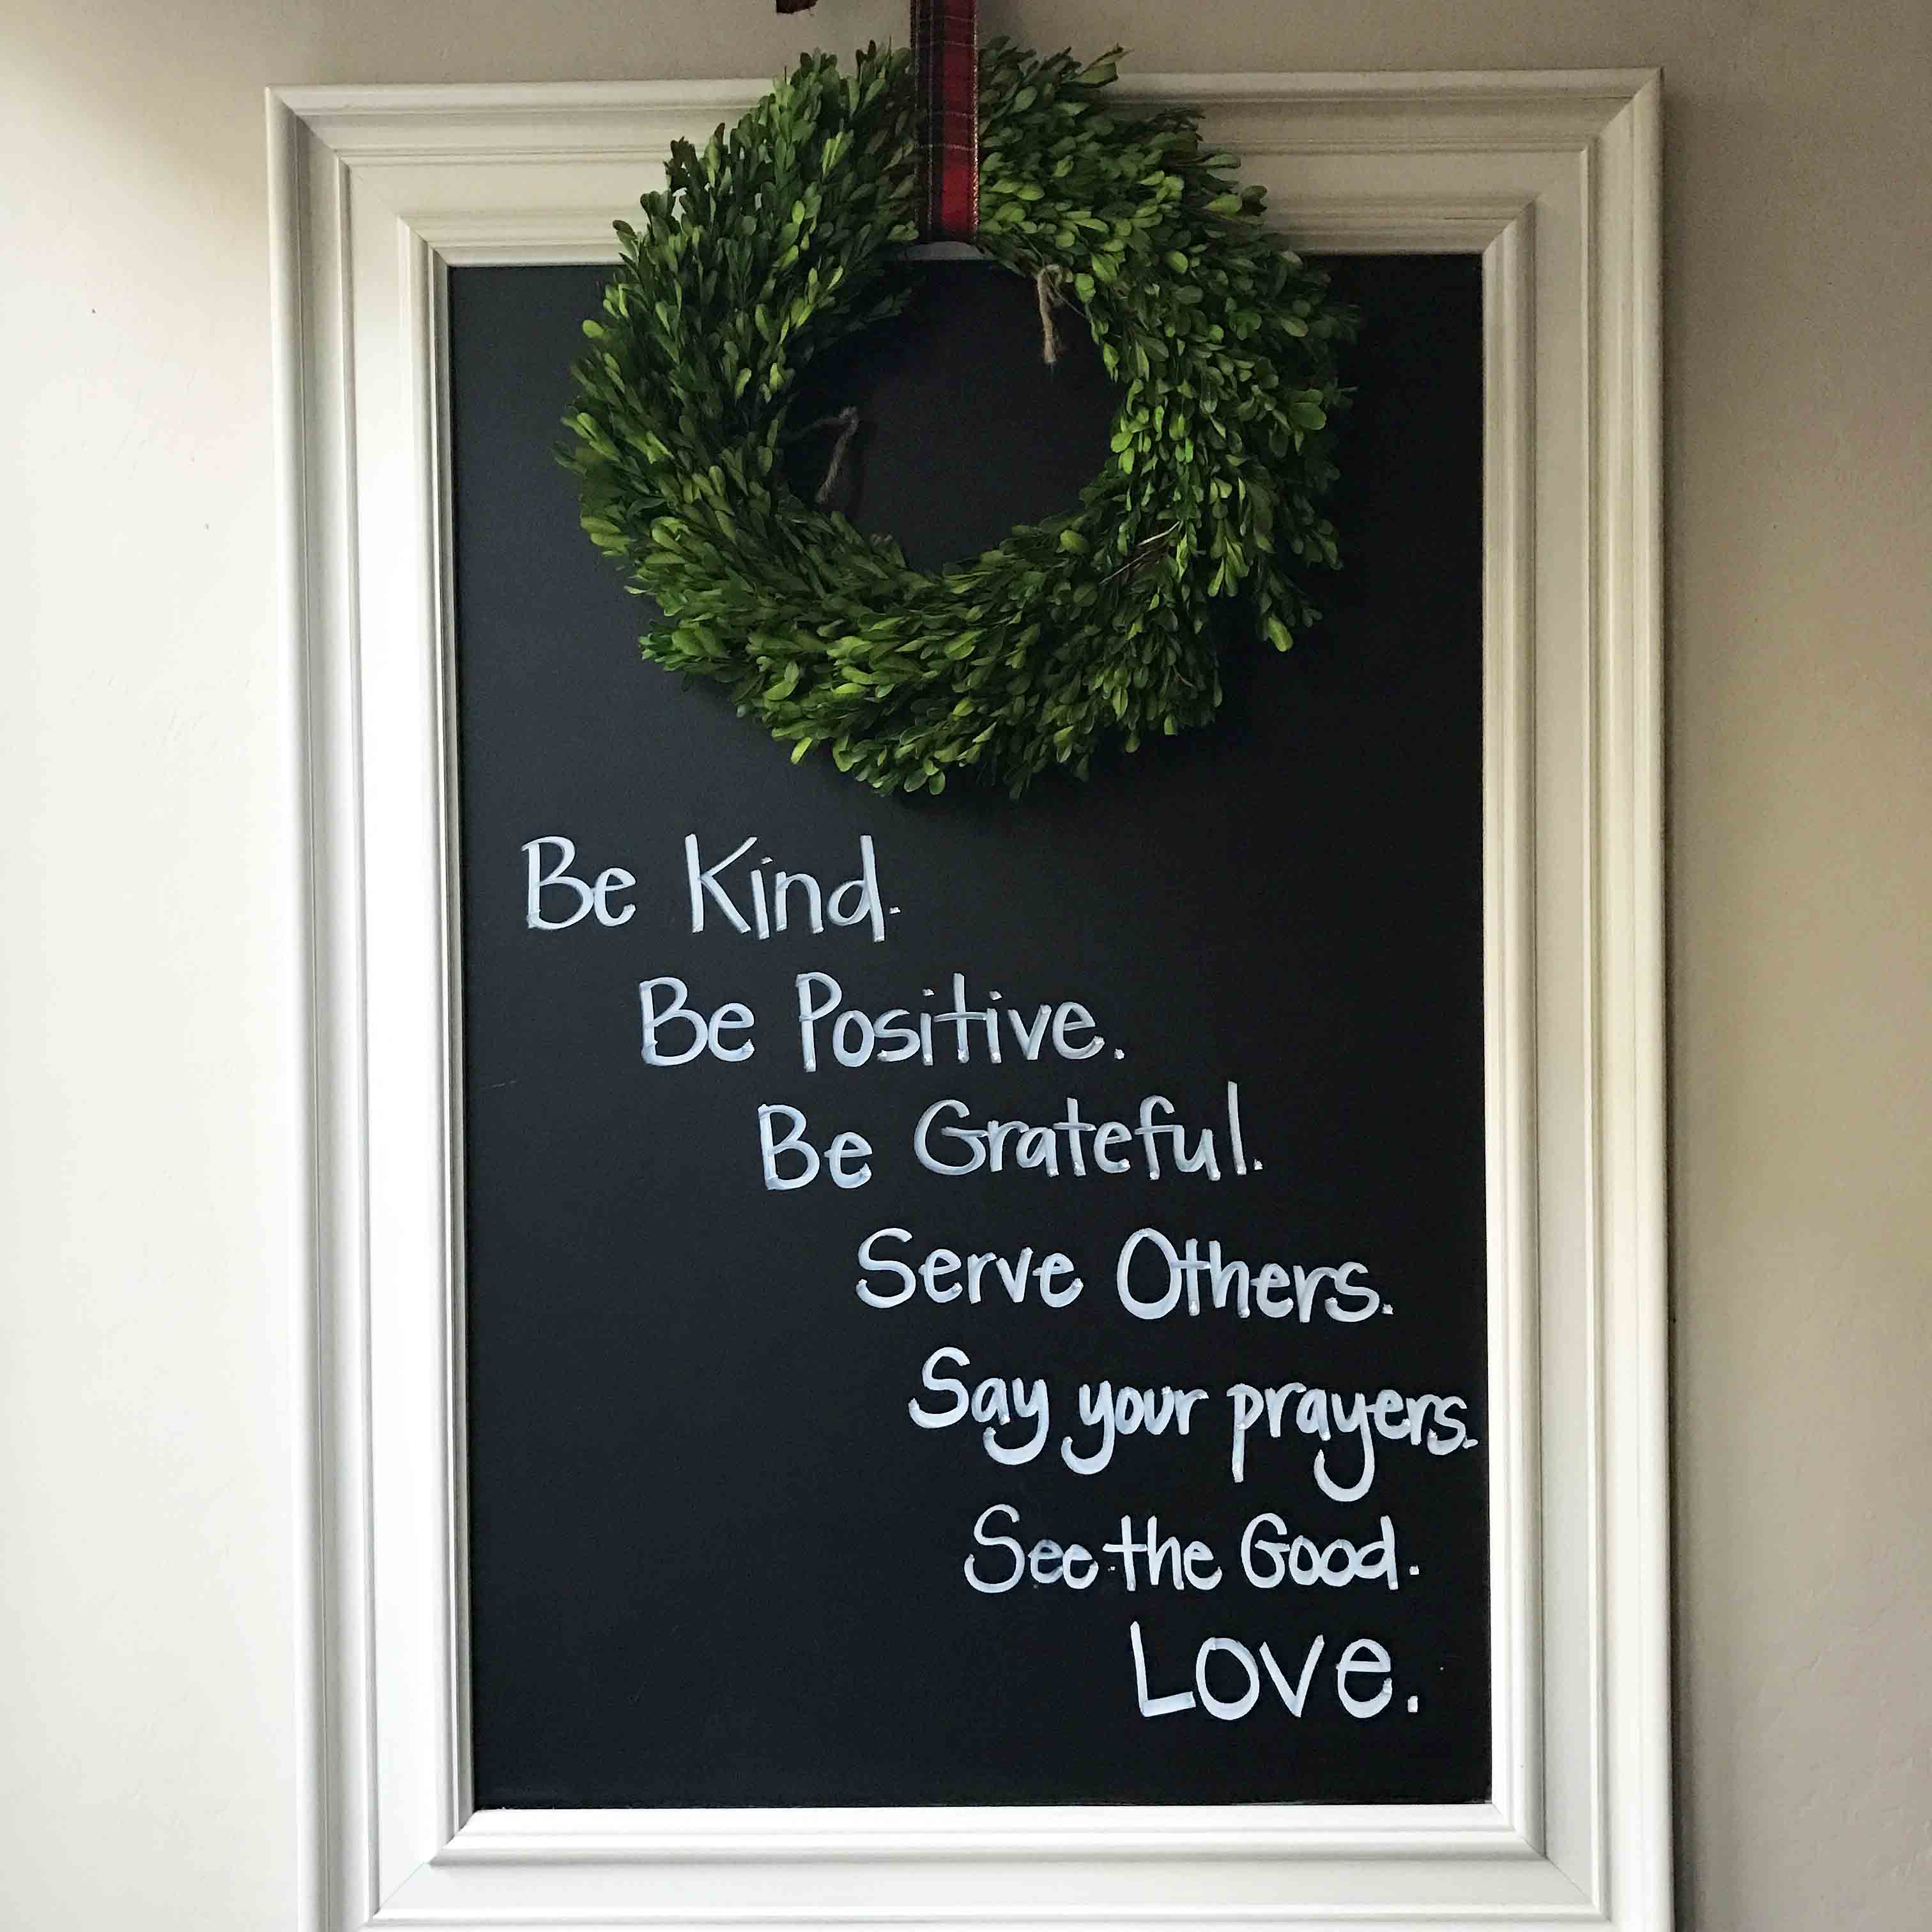 Christmas Decor Ideas by Modern Honey. Beautiful ways to transform your home for Christmas. Inspirational Chalkboard -- Be Kind. Be Positive. Be Grateful. Serve Others. Say your Prayers. See the Good. Love.